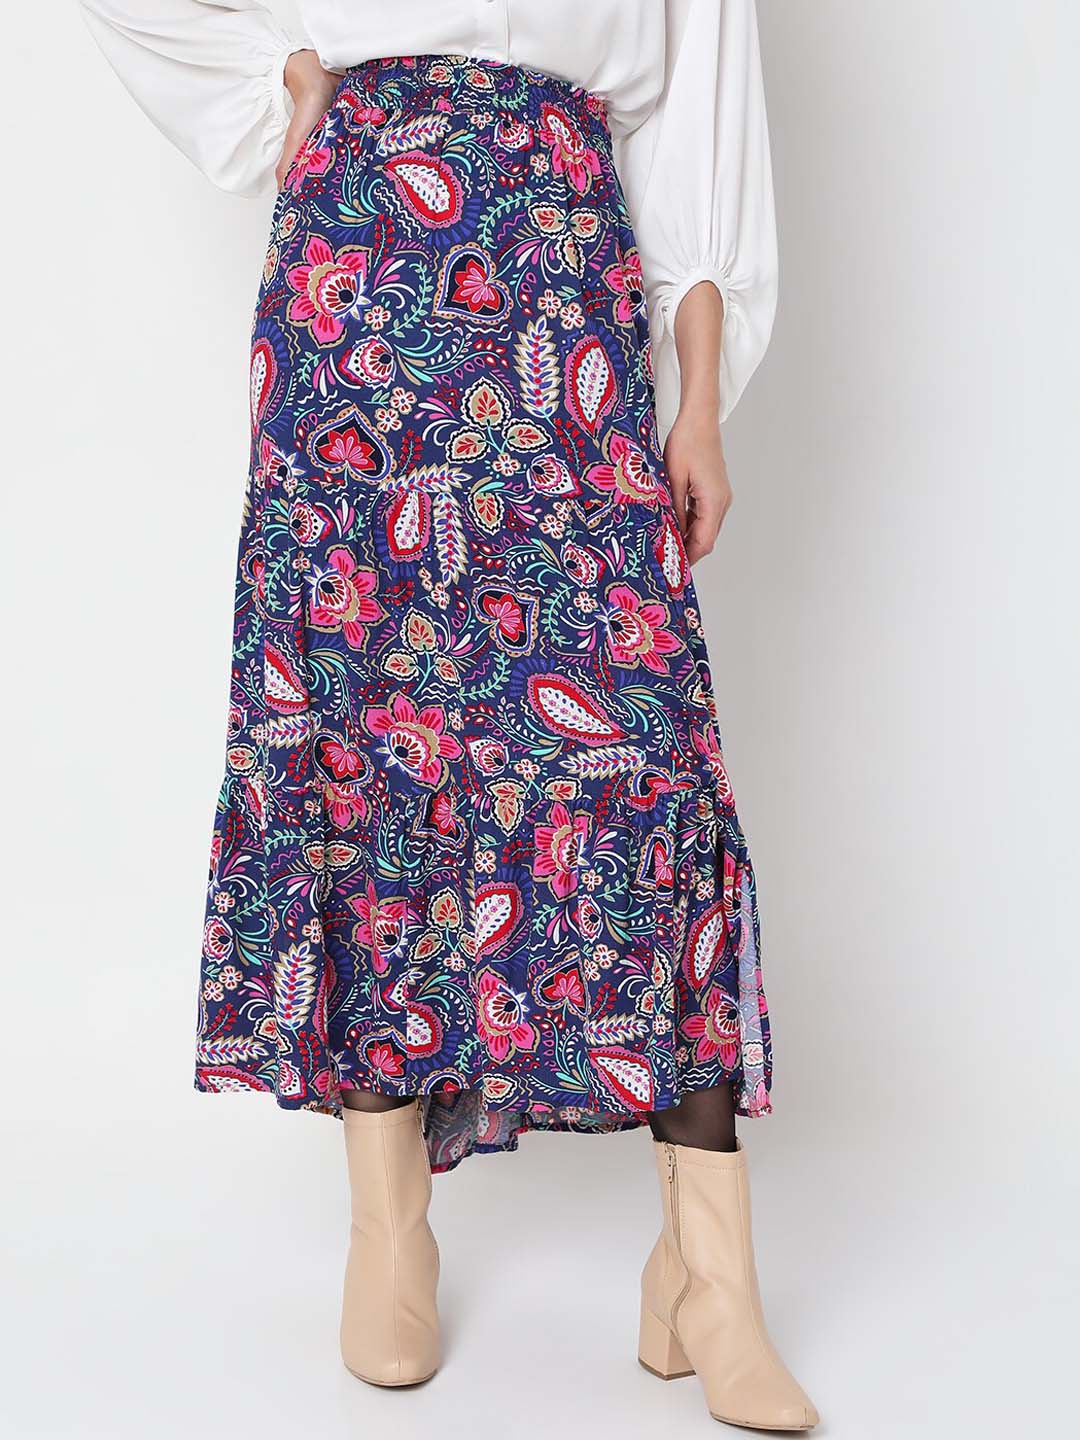 Vero Moda Blue & Pink Floral Printed A-Line Midi Flared Skirts Price in India